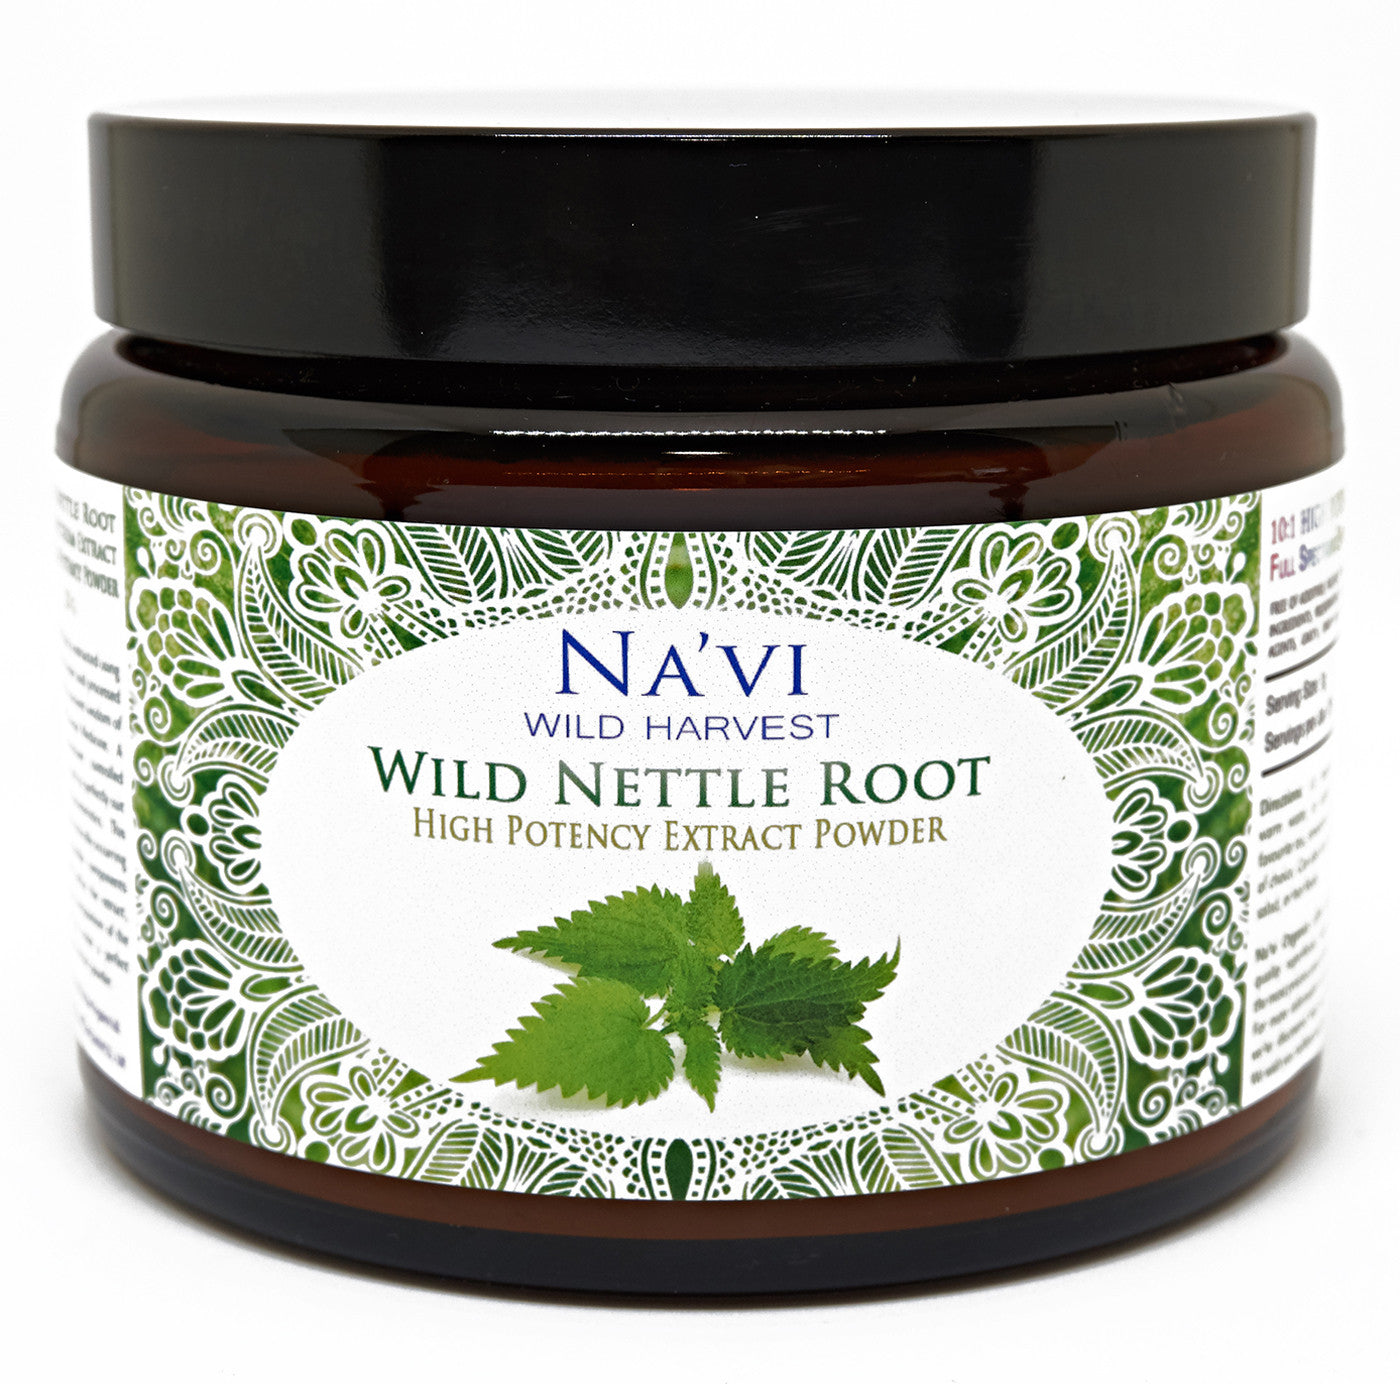 250 gram jar of wild harvested nettle root extract powder